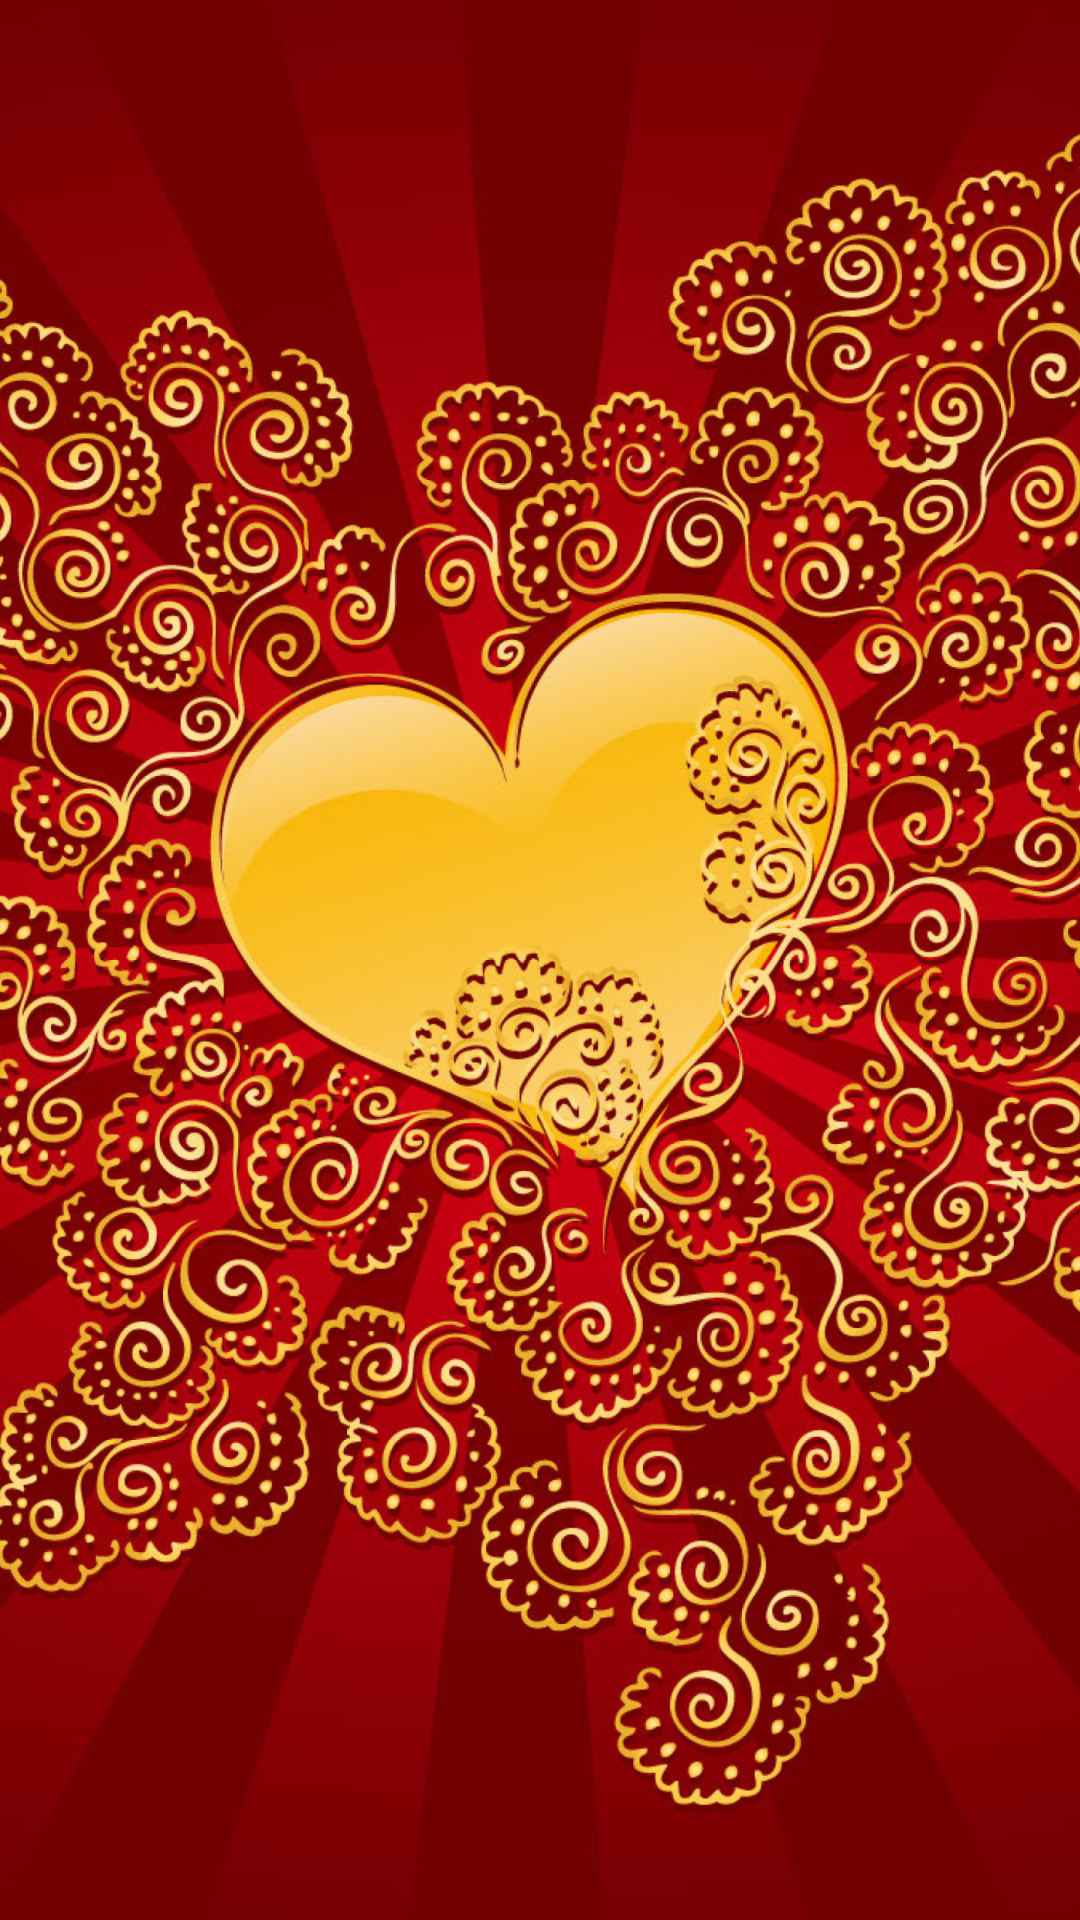 Yellow Heart On Red wallpaper 1080x1920